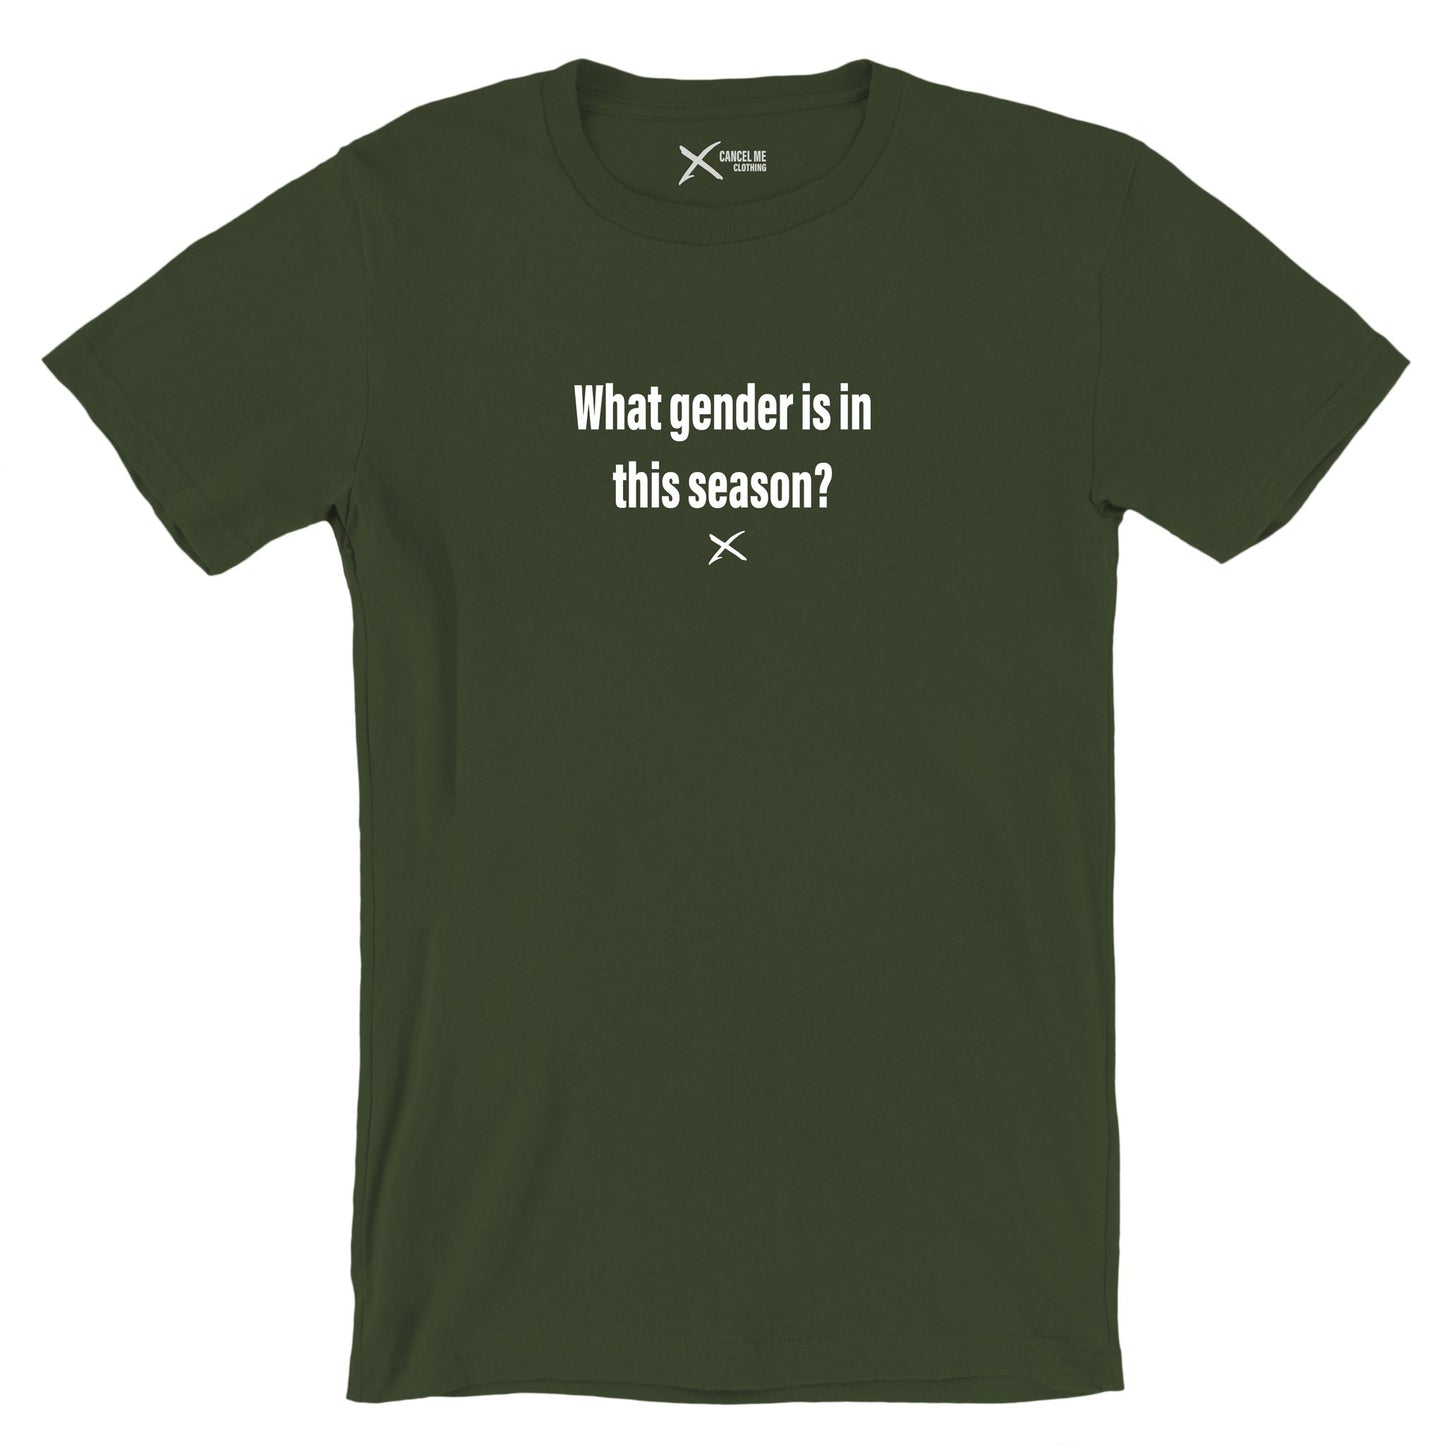 What gender is in this season? - Shirt